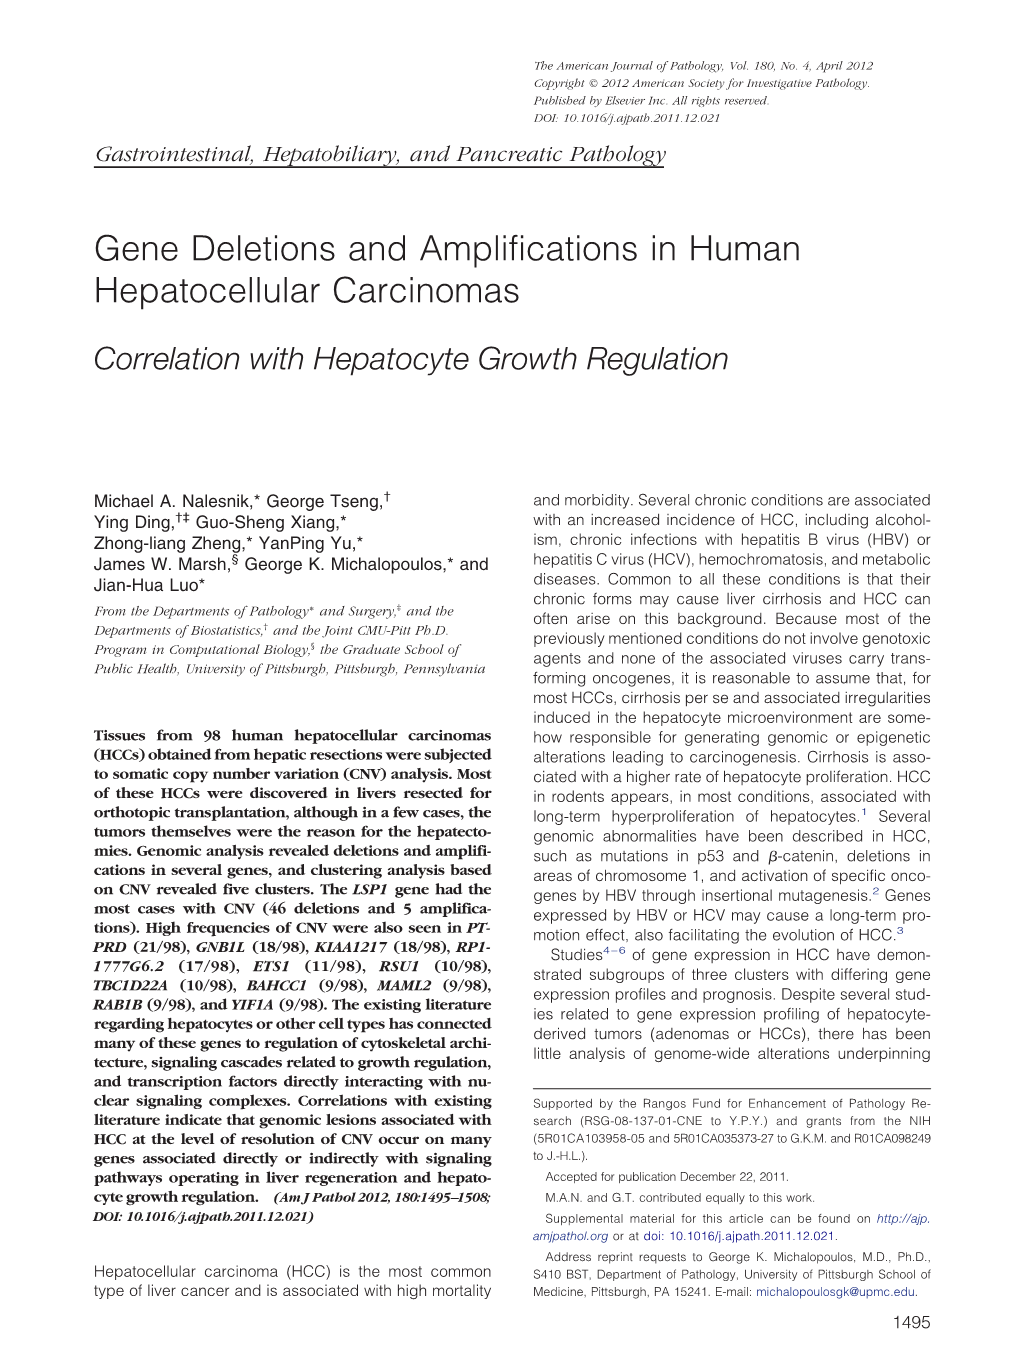 Gene Deletions and Amplifications in Human Hepatocellular Carcinomas